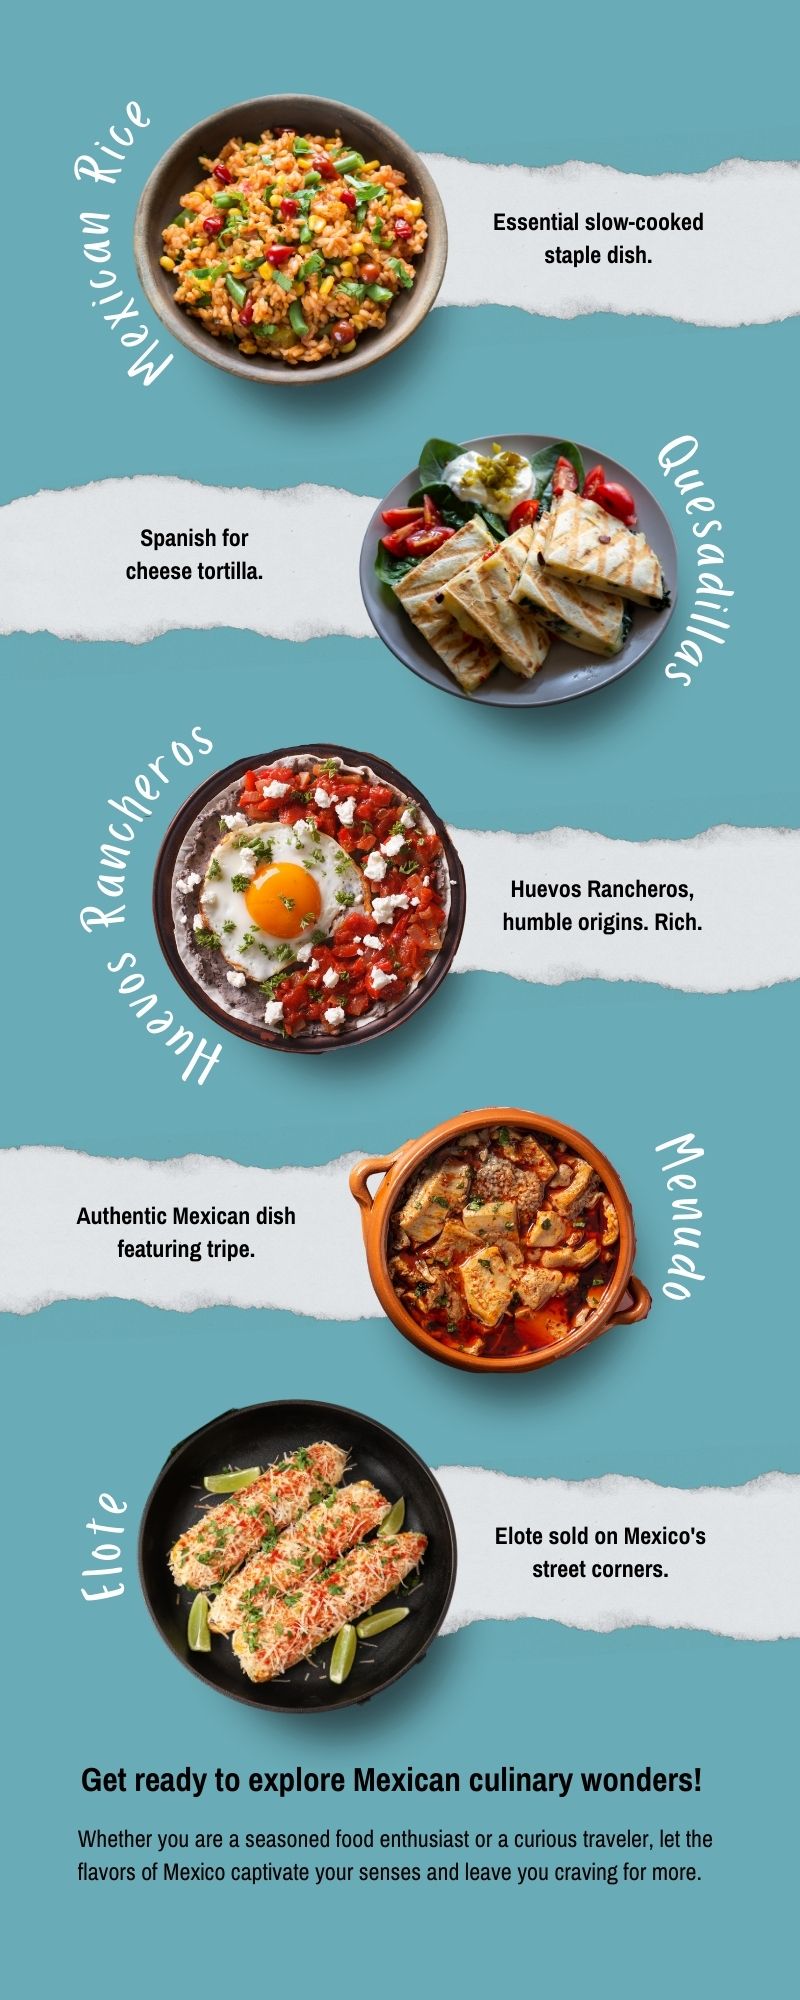 Top 10 foods to try in Mexico infographic